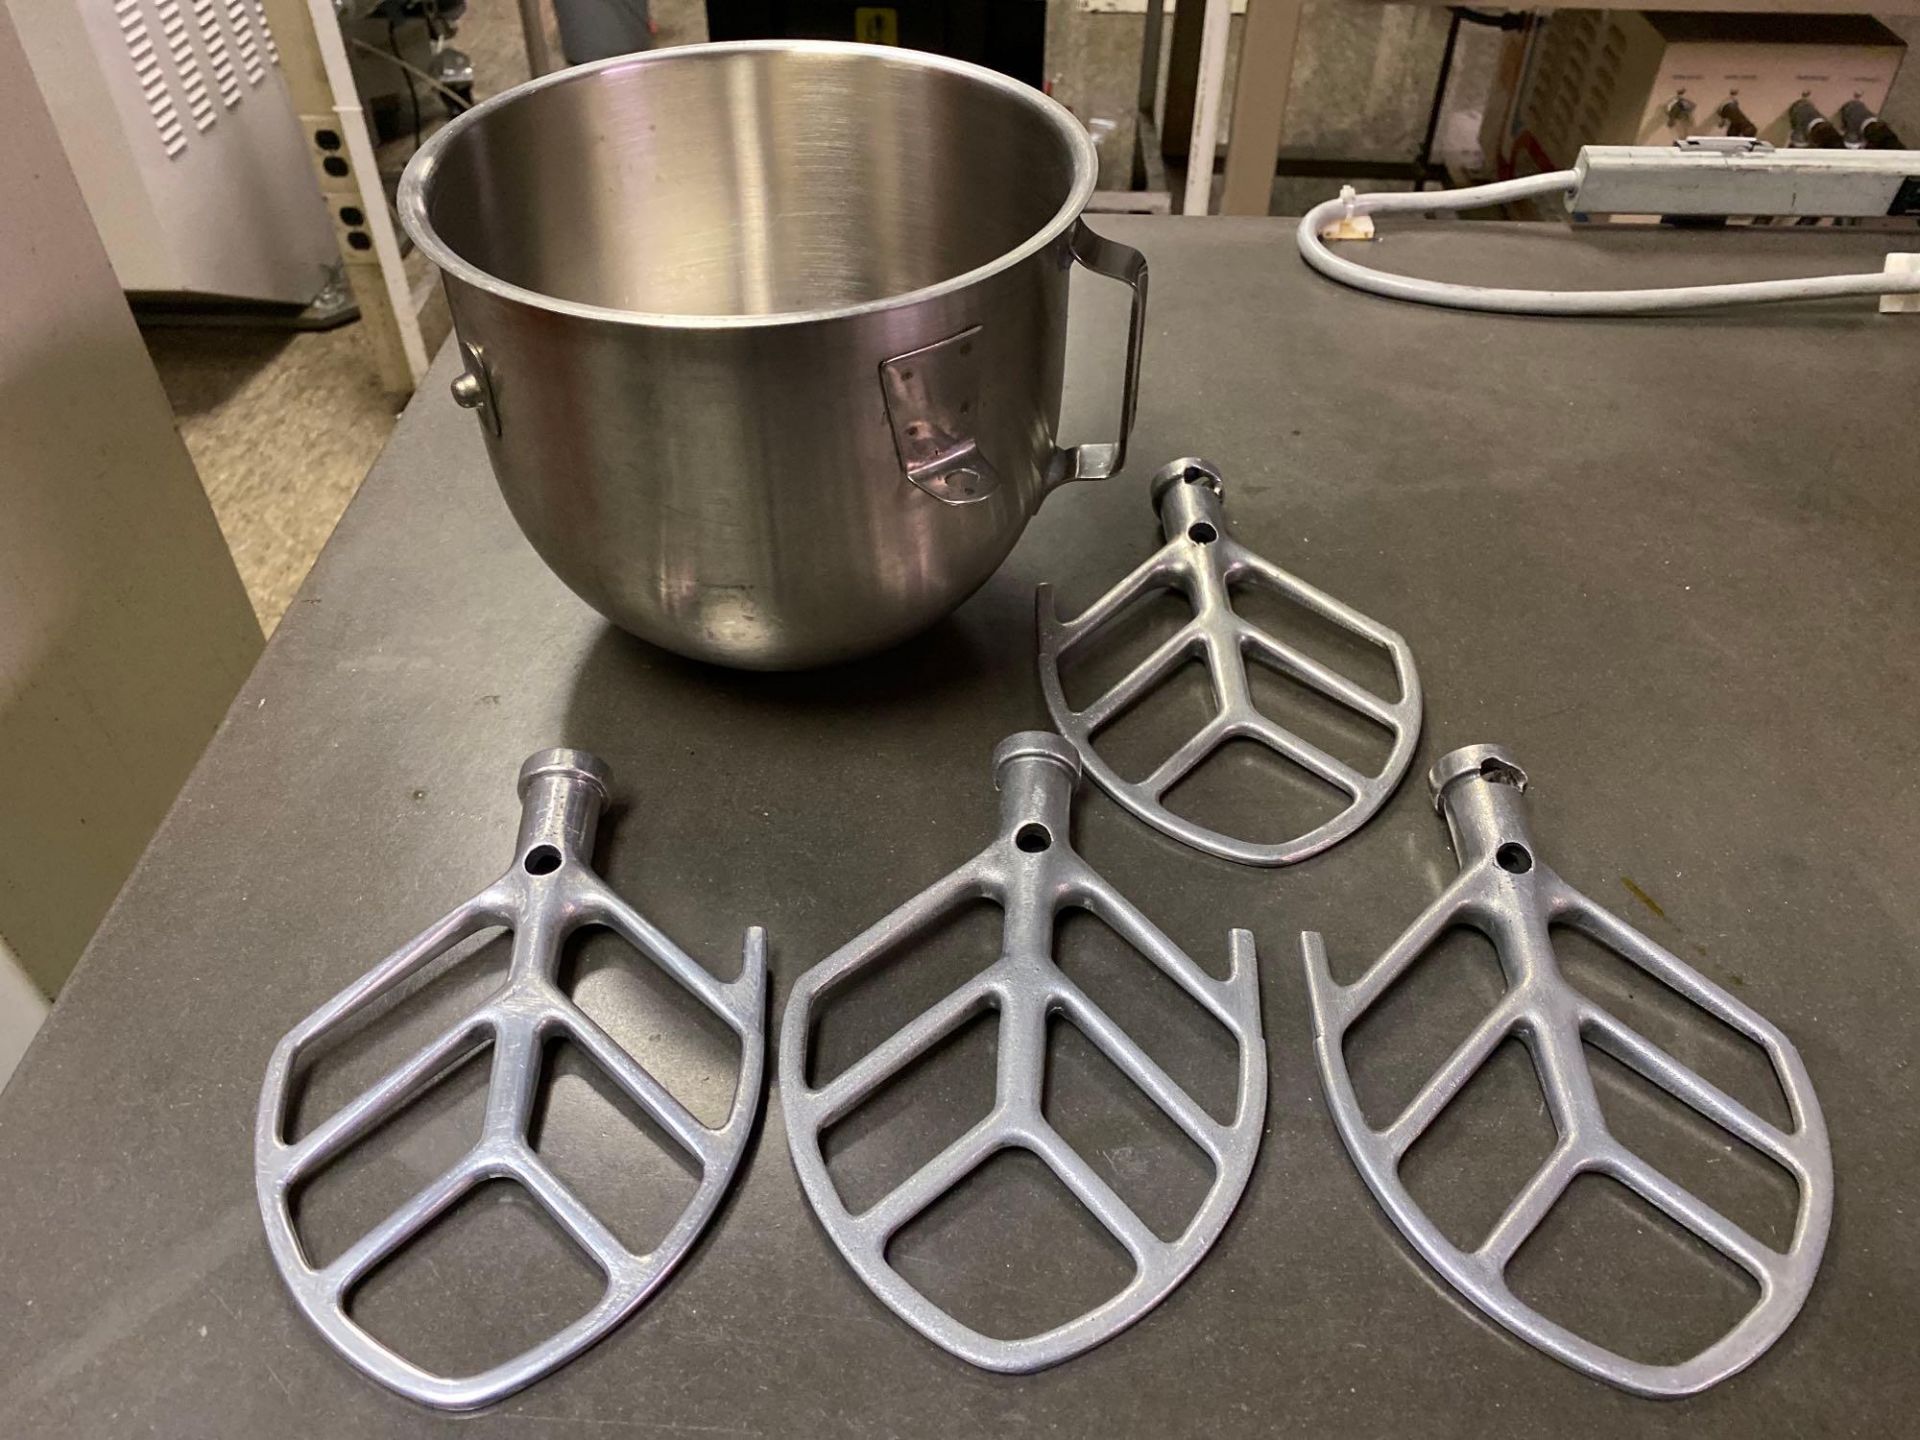 Lot of (4) Aluminum Beater Paddles and (1) Stainless Bowl for N-50 Hobart Mixers - Image 4 of 4